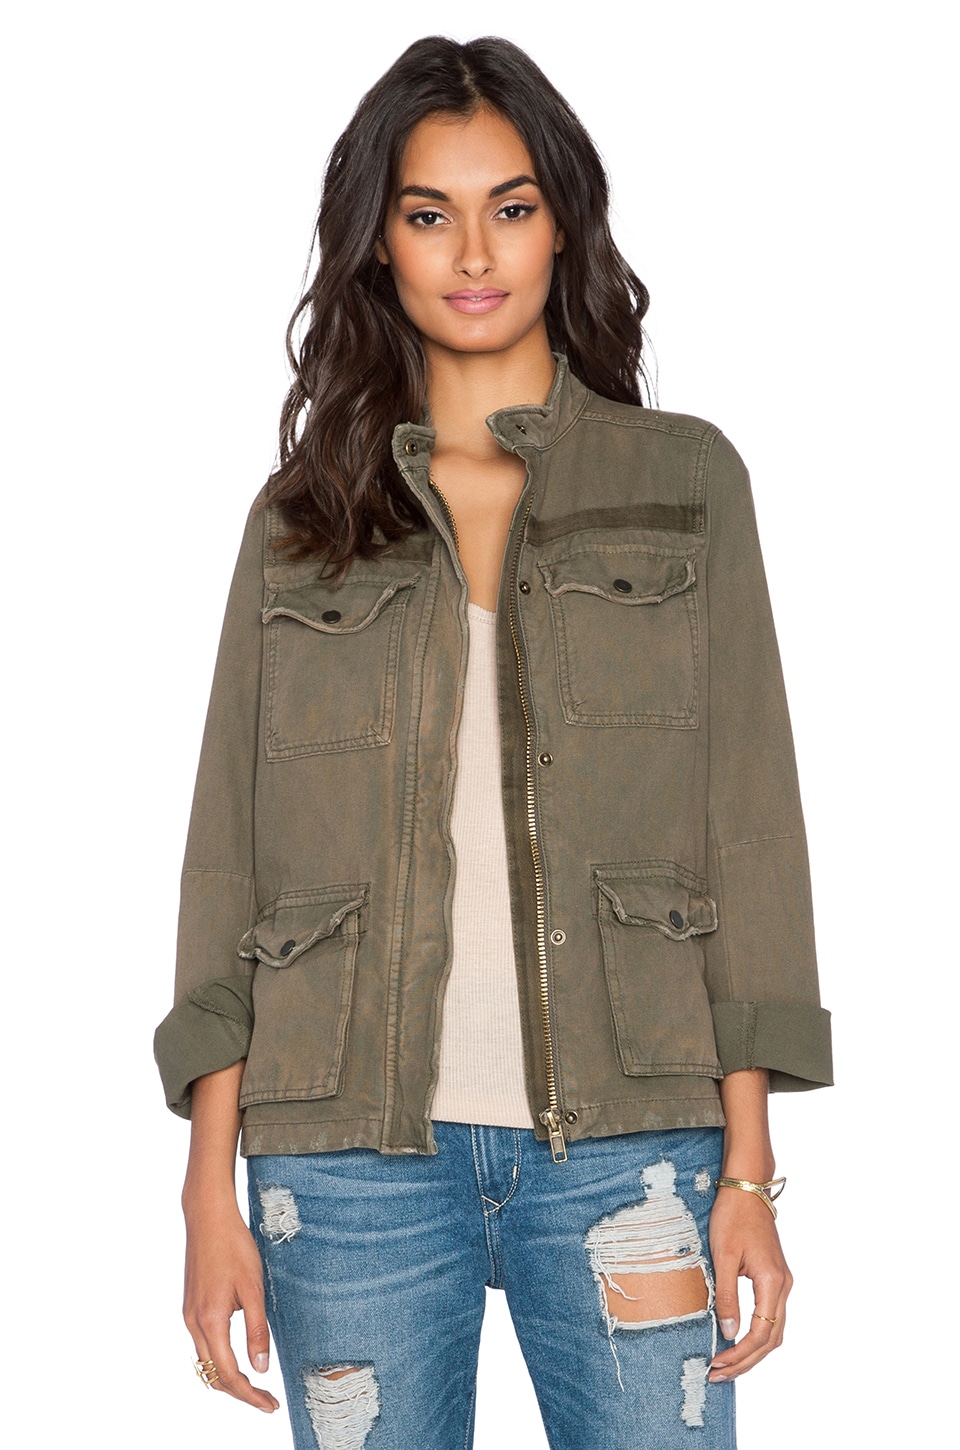 Free People Rumpled Army Jacket in Olive | REVOLVE